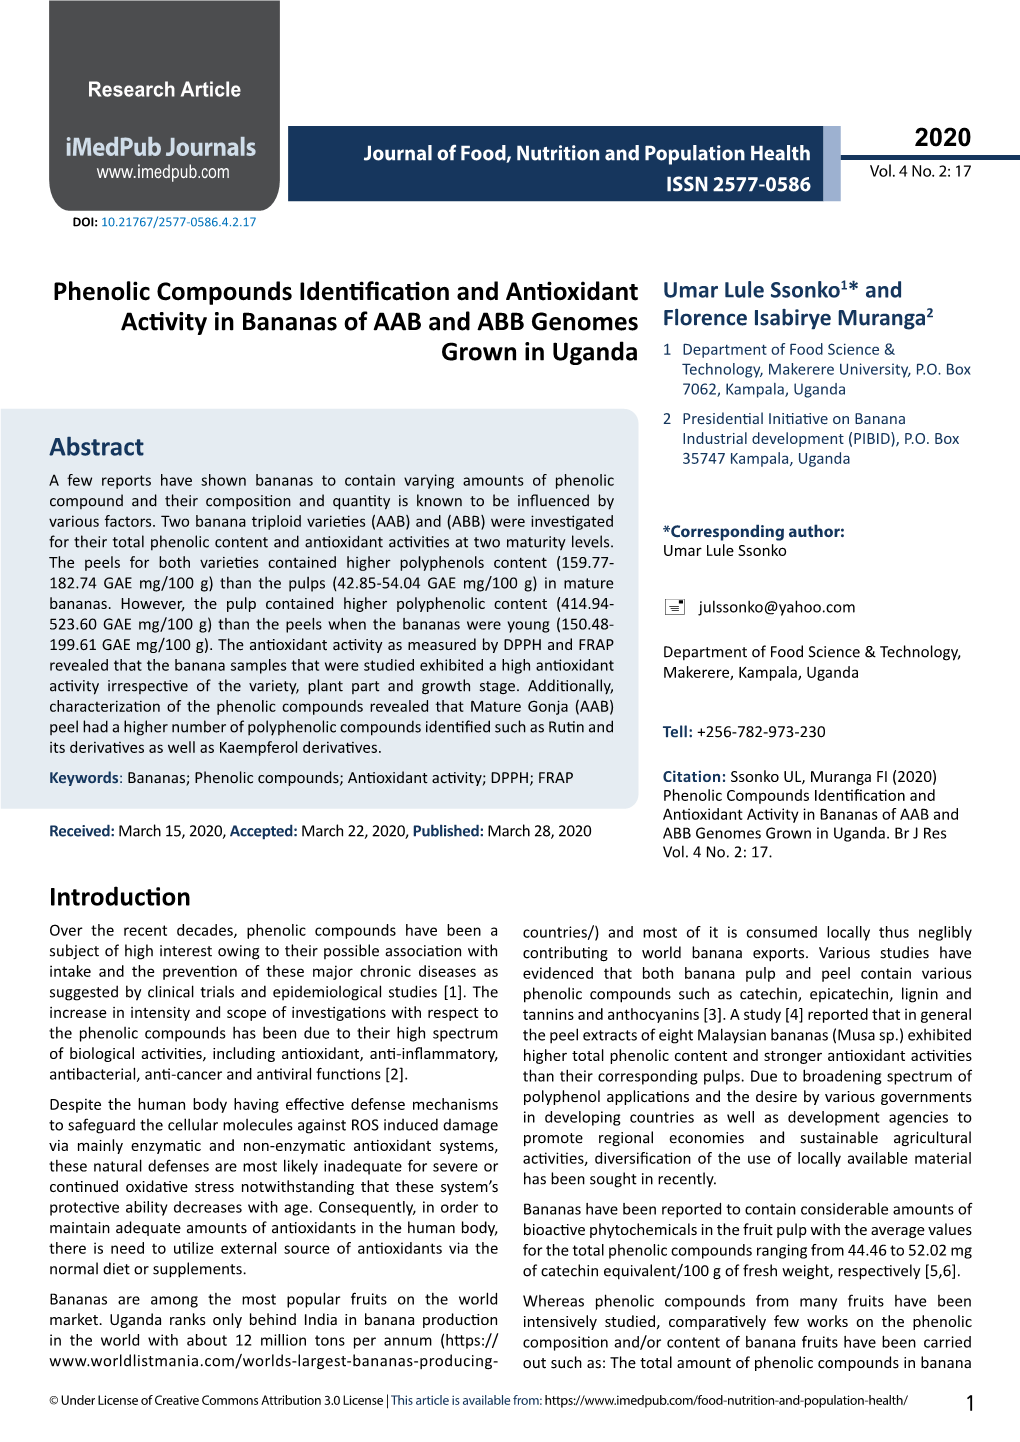 Phenolic Compounds Identification and Antioxidant Activity in Bananas